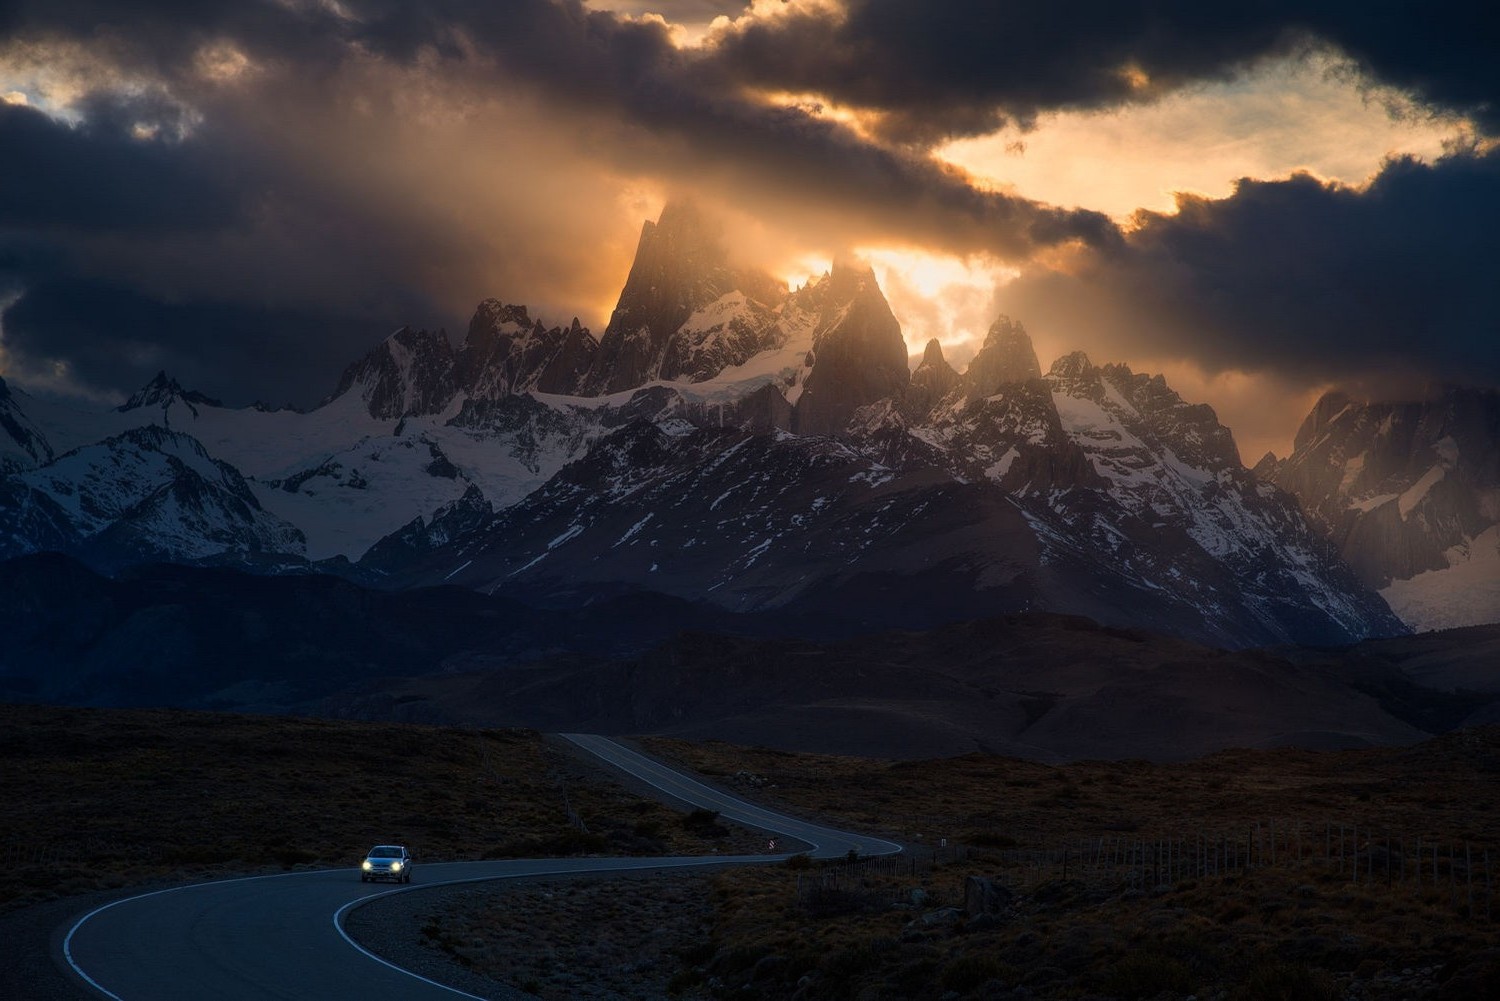 nature, Landscape, Mountains, Road, Car, Sunlight, Clouds, Snowy Peak, Sunset, Patagonia, Argentina Wallpaper